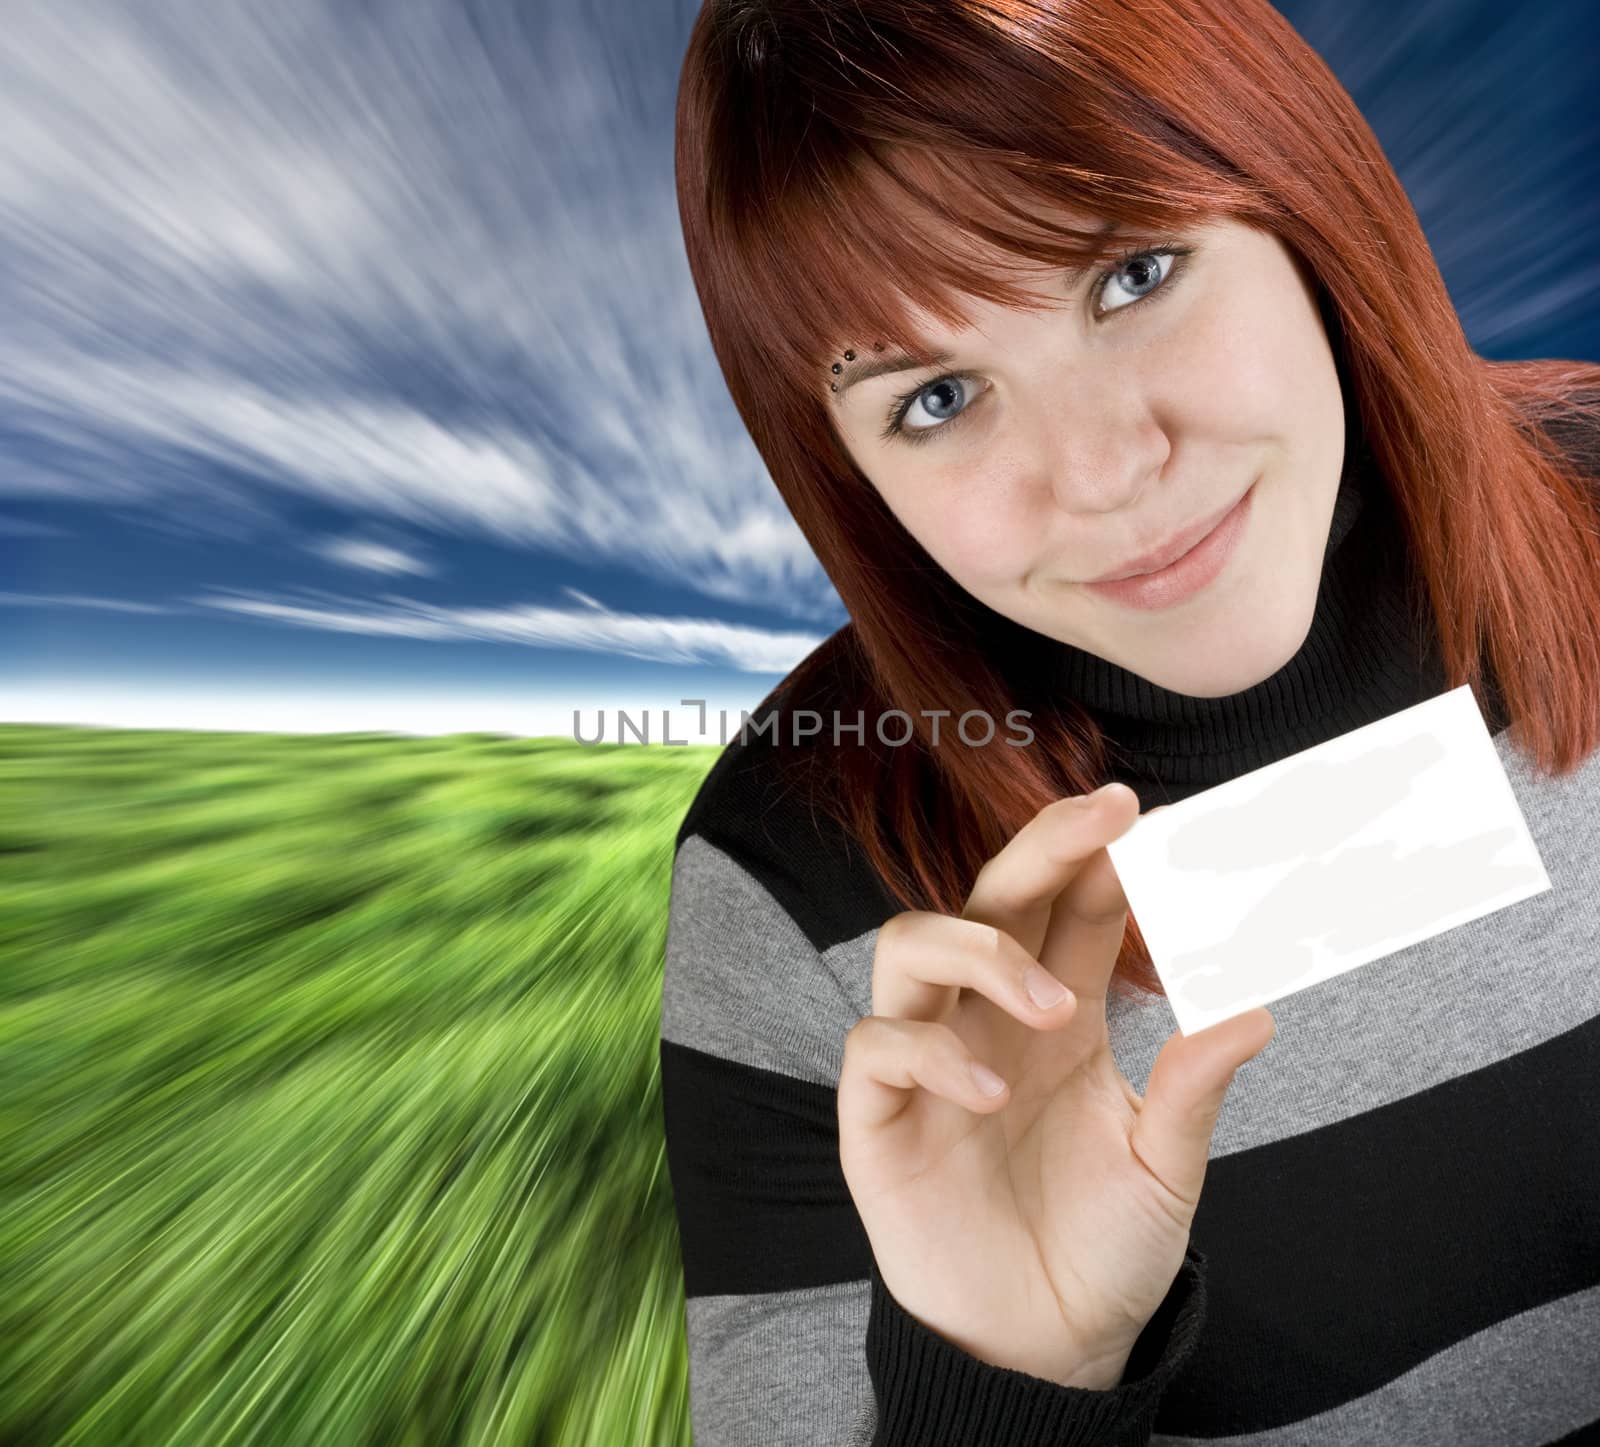 Smiling successful girl with red hair holding a blank empty business or greeting card.

Studio shot.